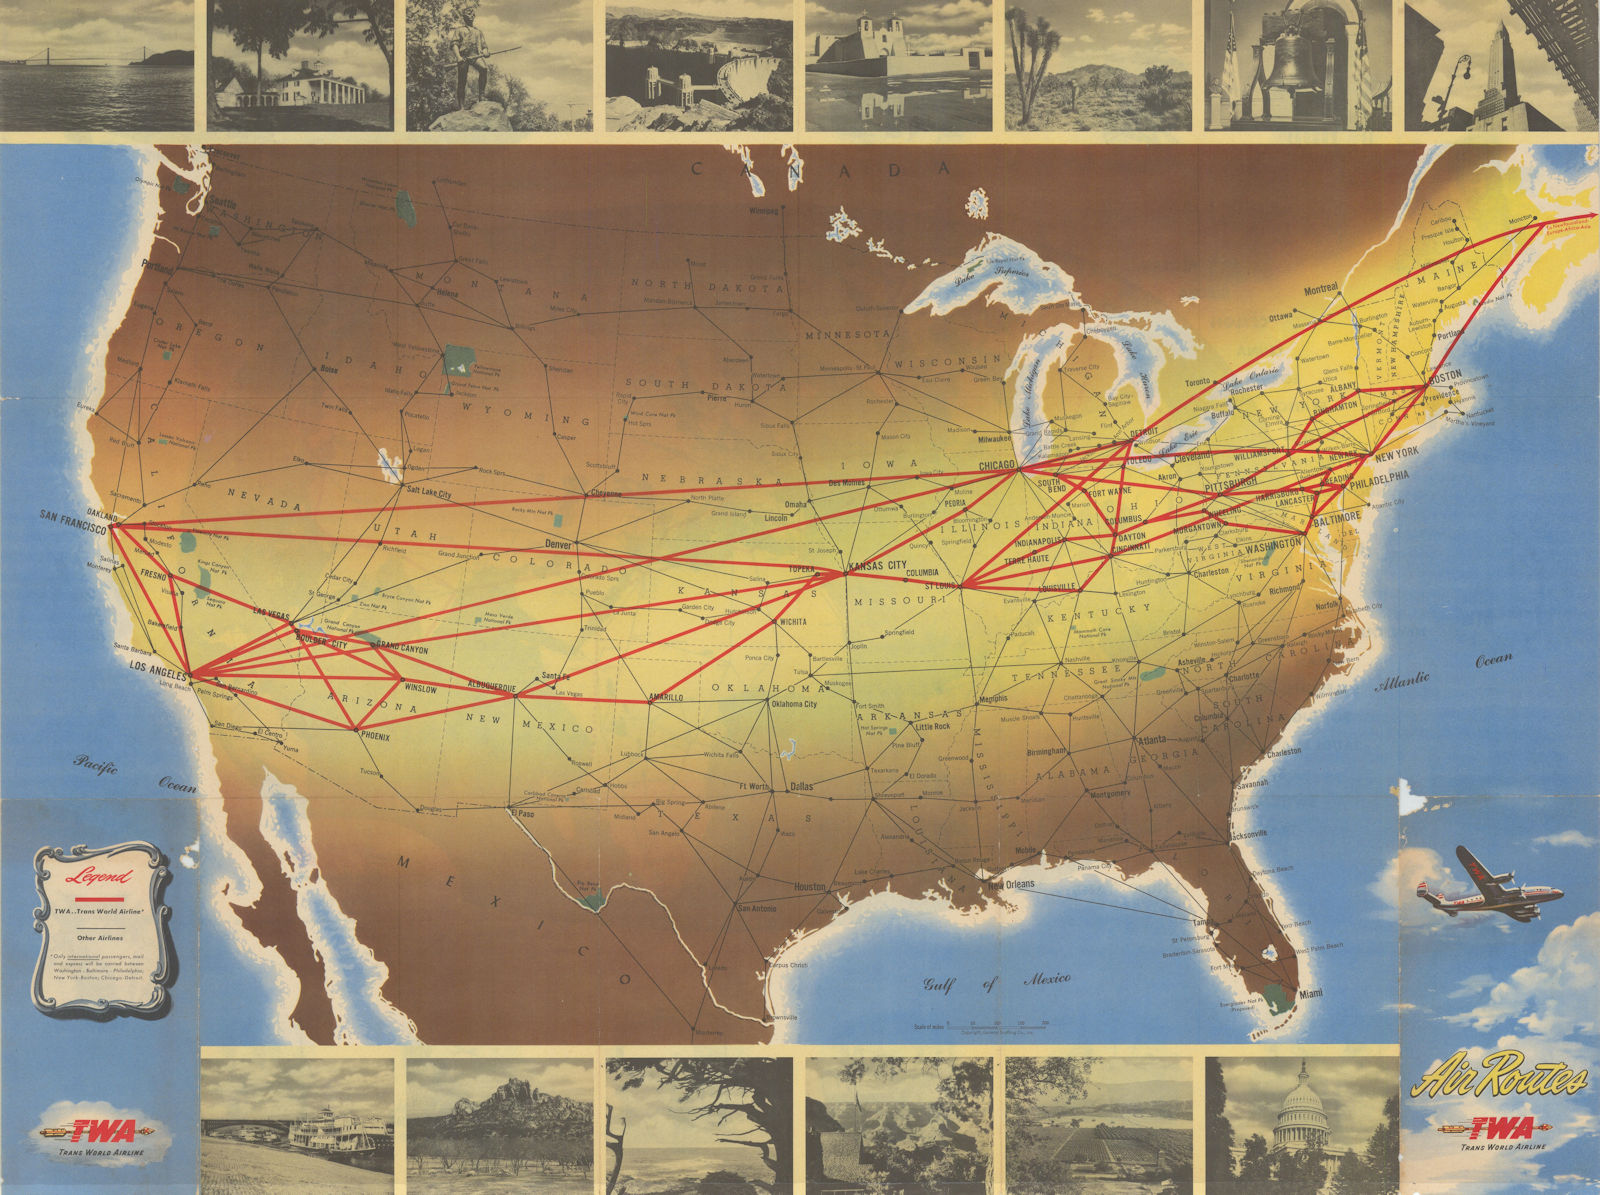 Air routes - TWA - Trans World Airline network system map. 24"x32" c1947